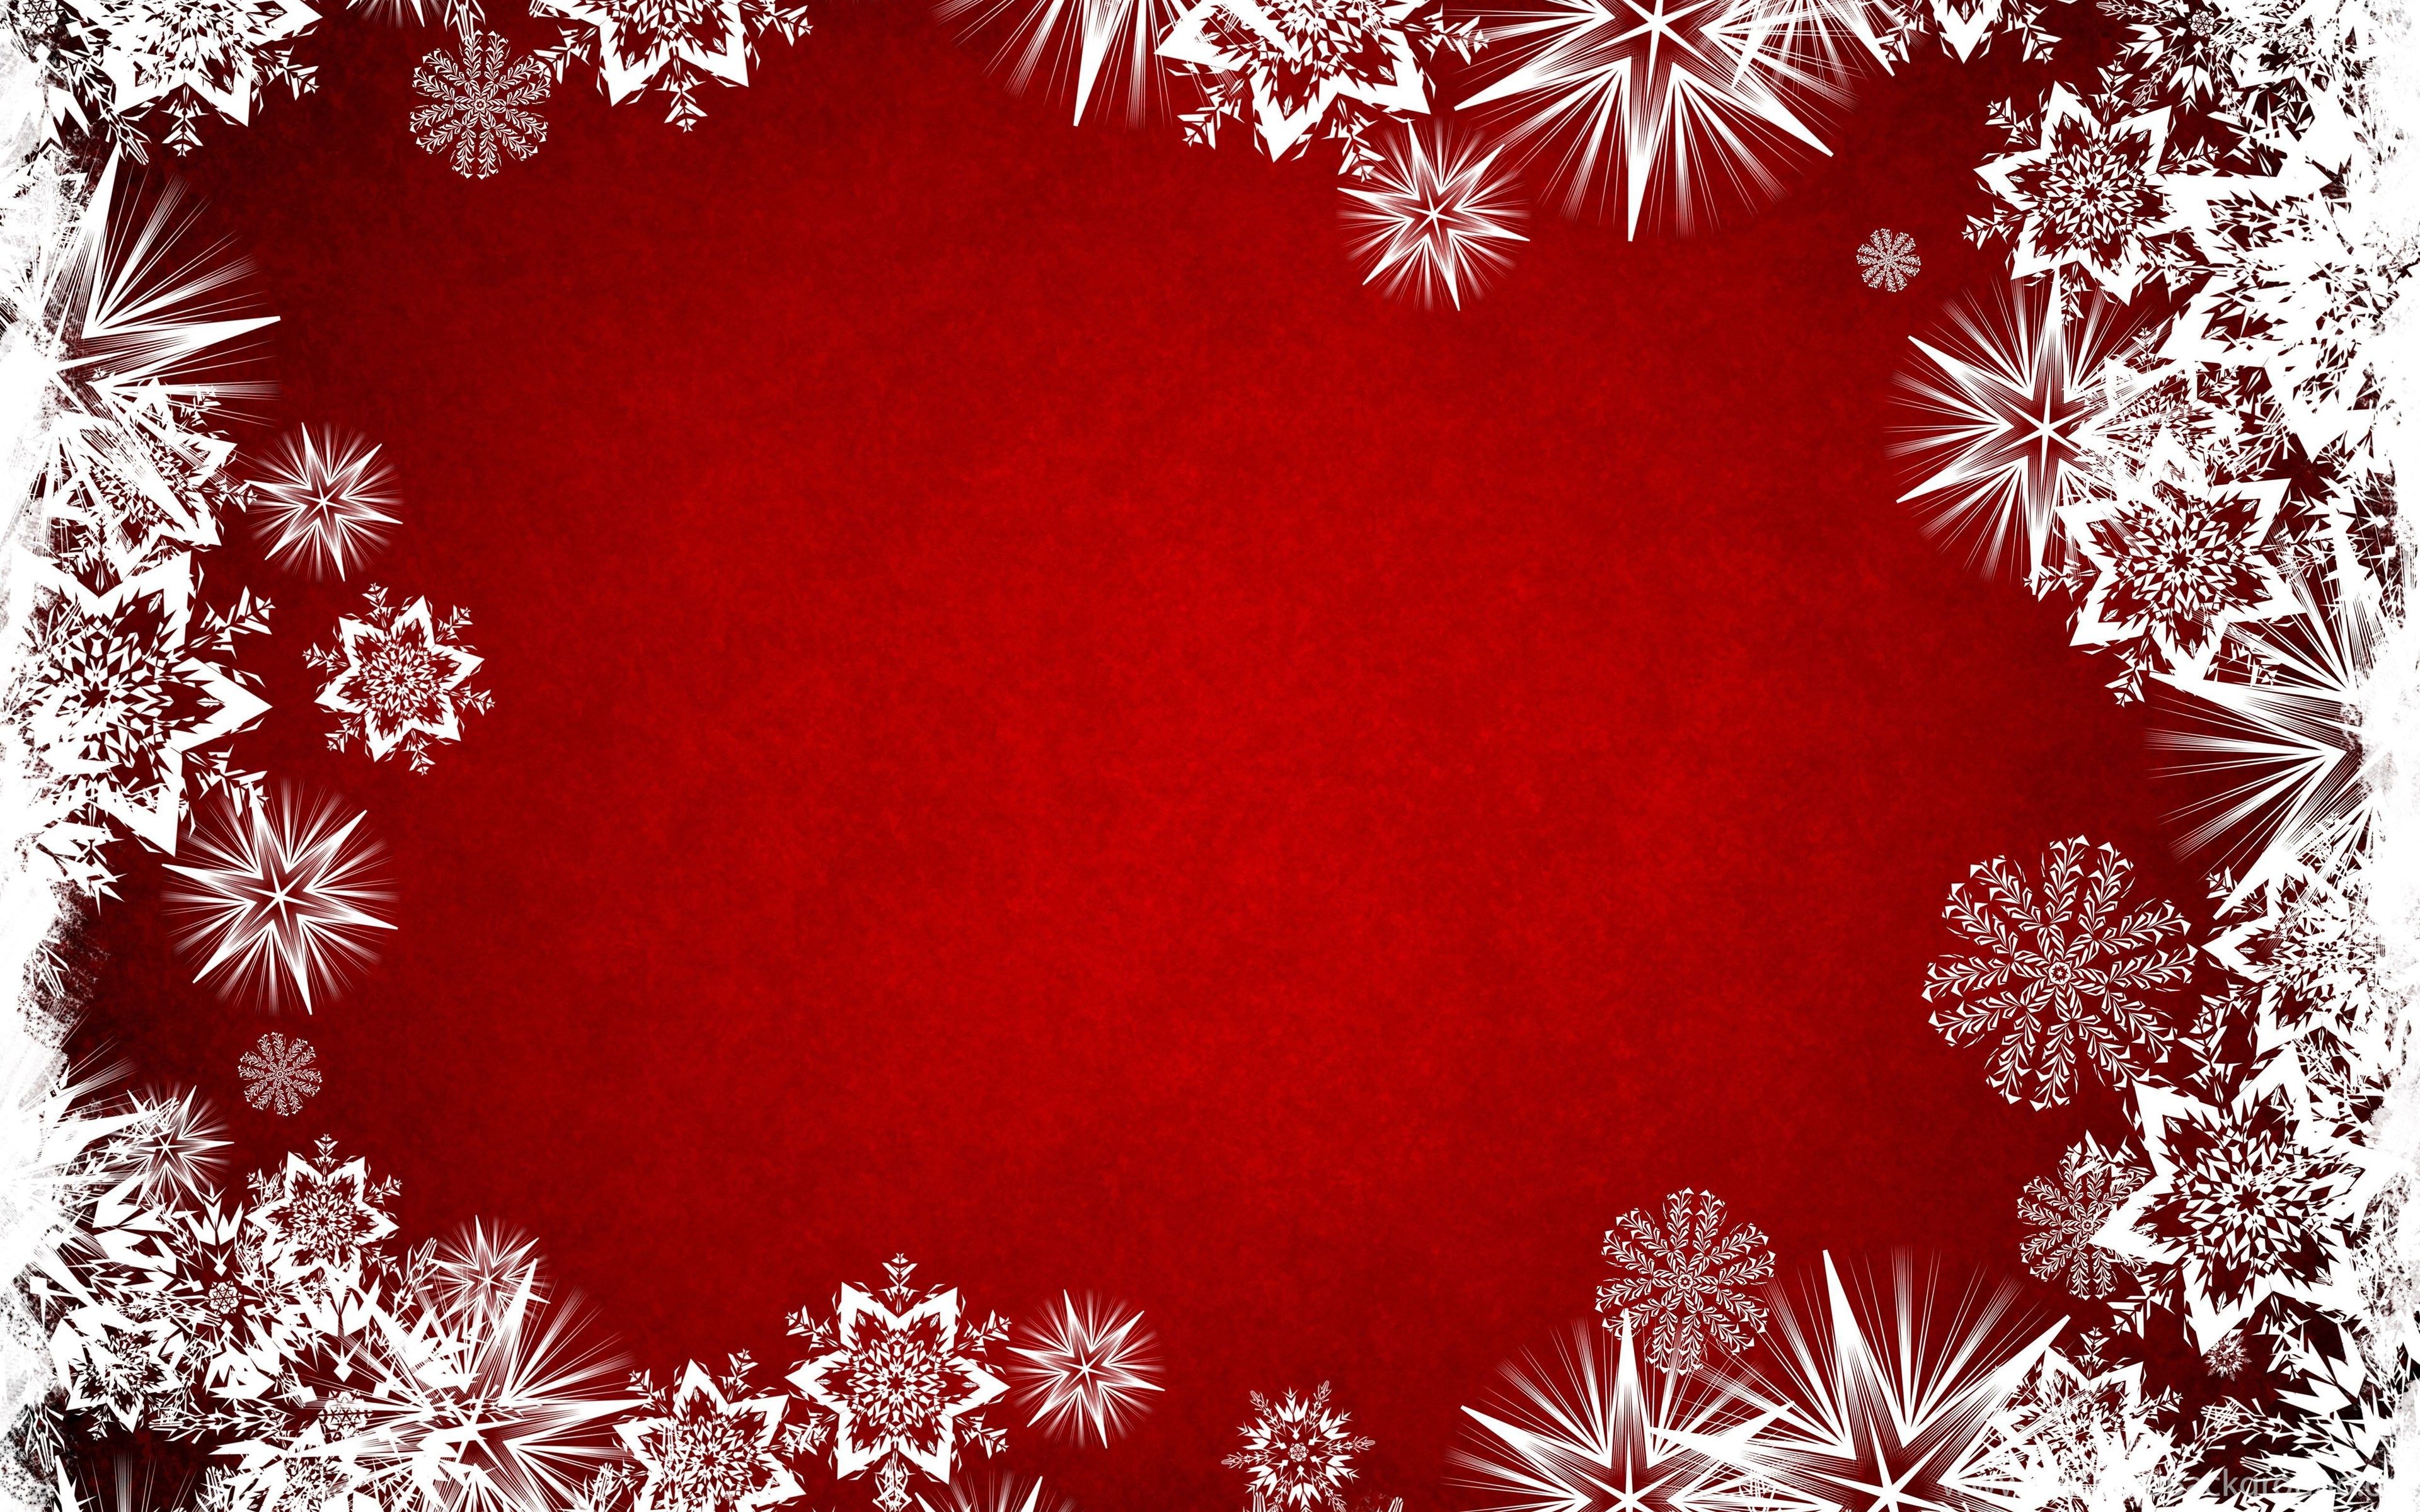 Red And White Christmas Wallpaper Desktop Background